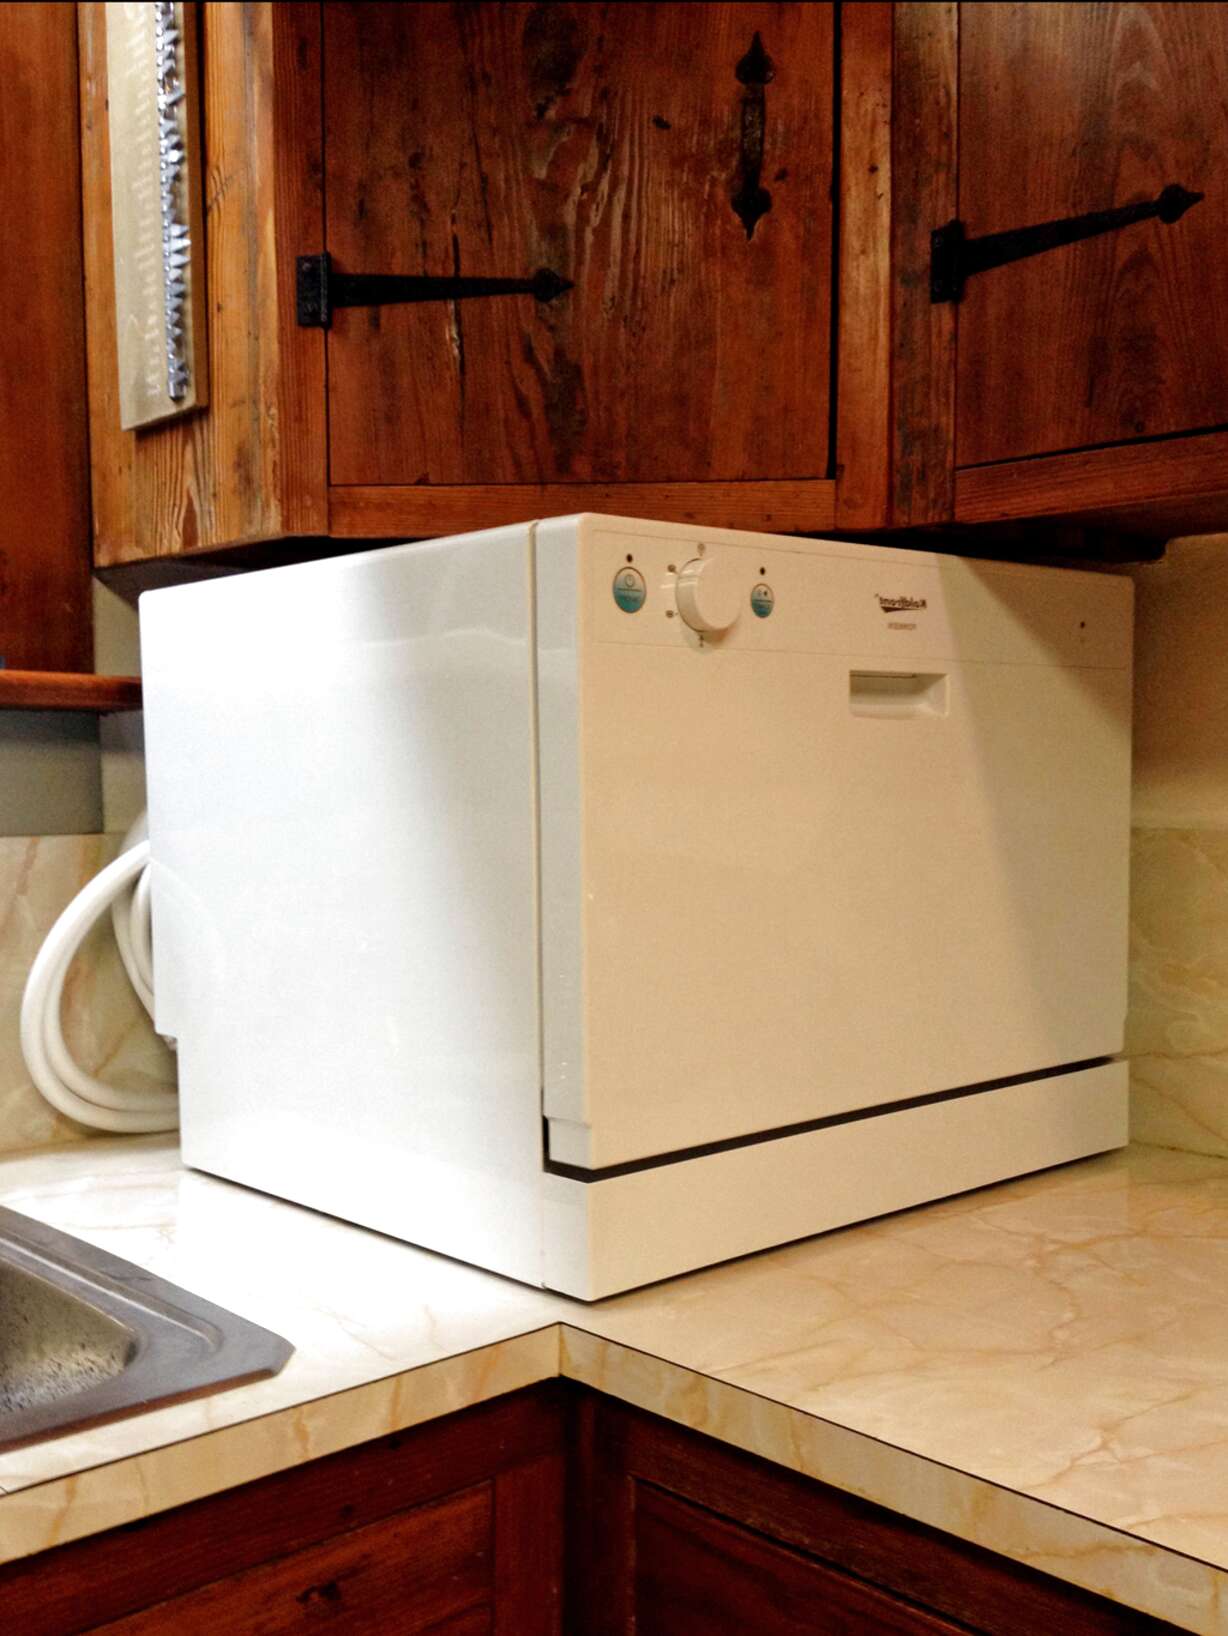 Countertop Dishwasher For Sale In Uk View 58 Bargains